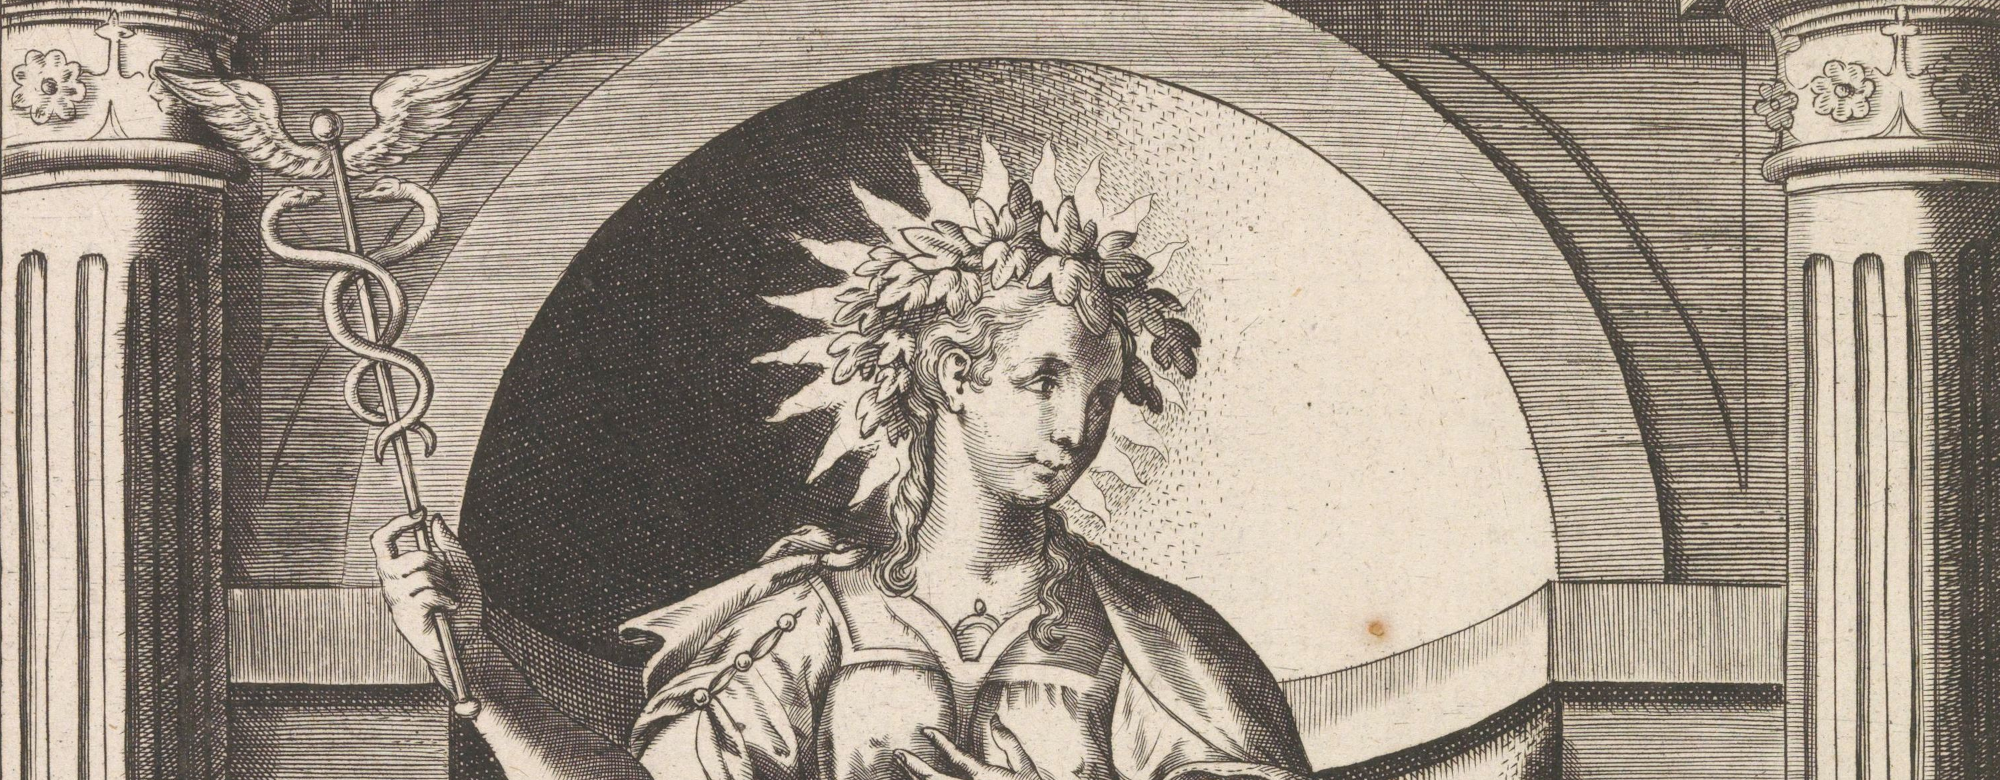 Engraving of the female personification of the gift of learning in a niche, one of the seven gifts of the Holy Spirit. She wears a crown of leaves and in her right hand she holds a caduceus. A radiant sun around her head.